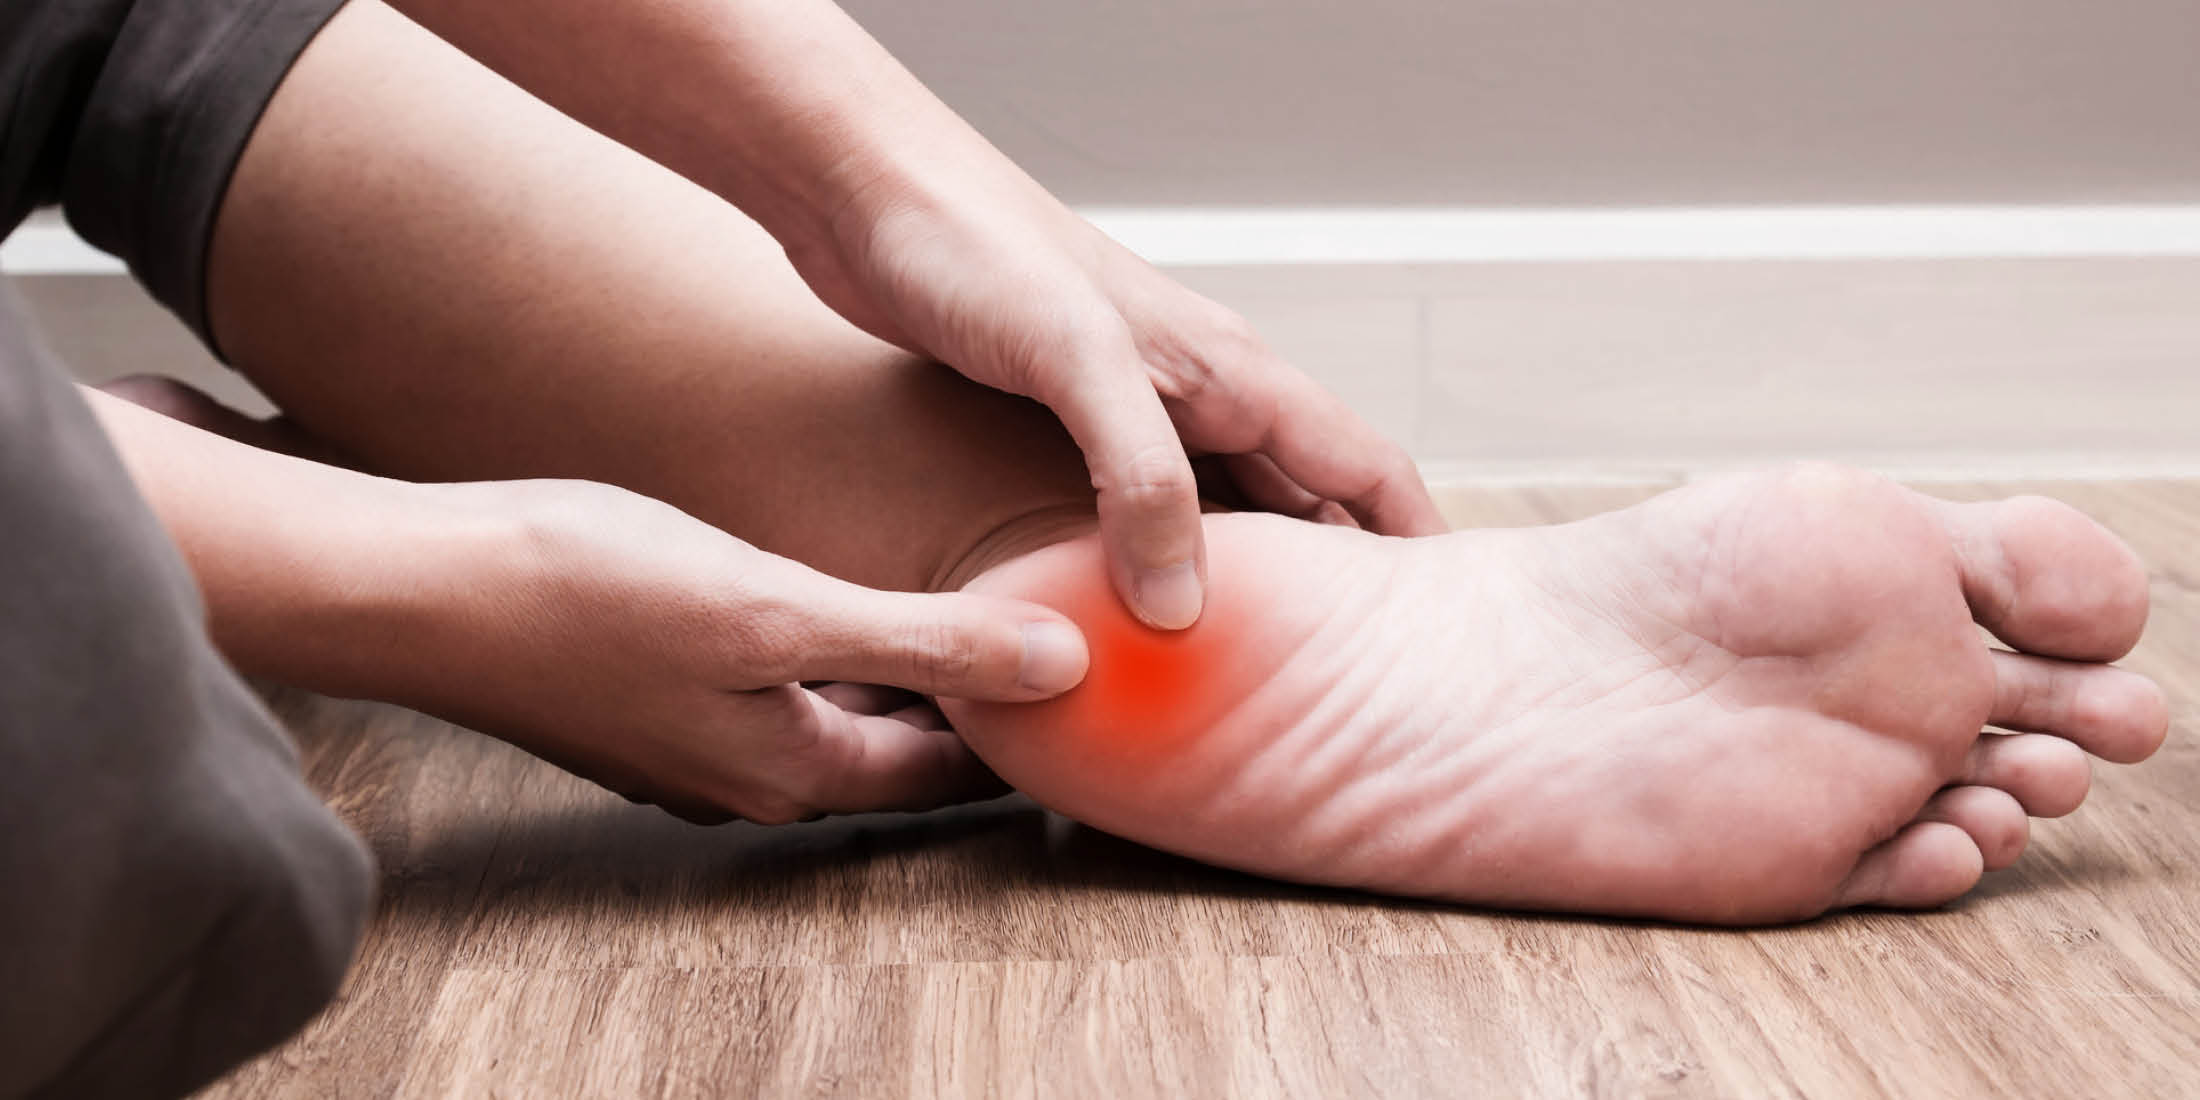 Peroneal Tendonitis | Peroneal Injury Treatment at The Foot Practice